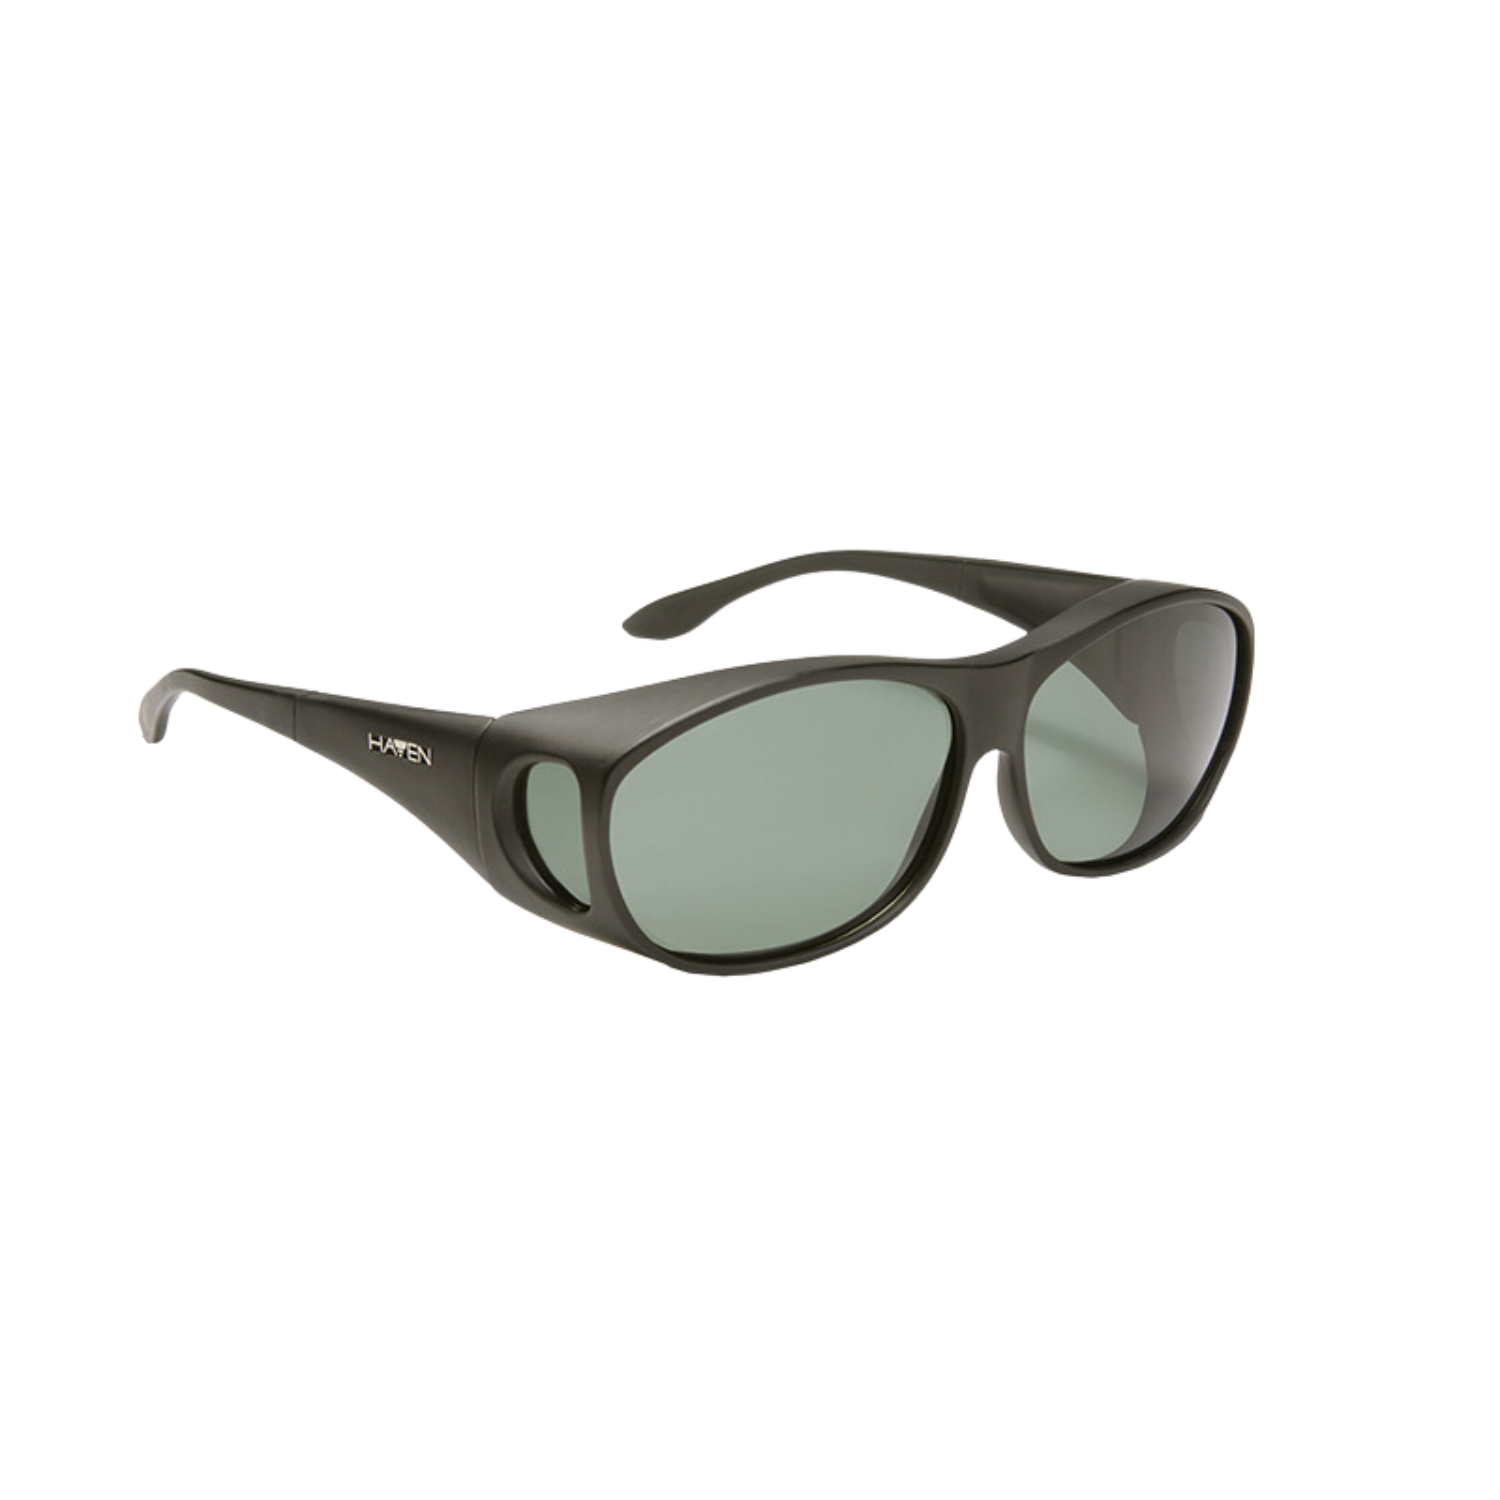 Image of the Eschenbach medium frame Haven Meridian polarized sunglasses with black fit-over frames and gray lenses.